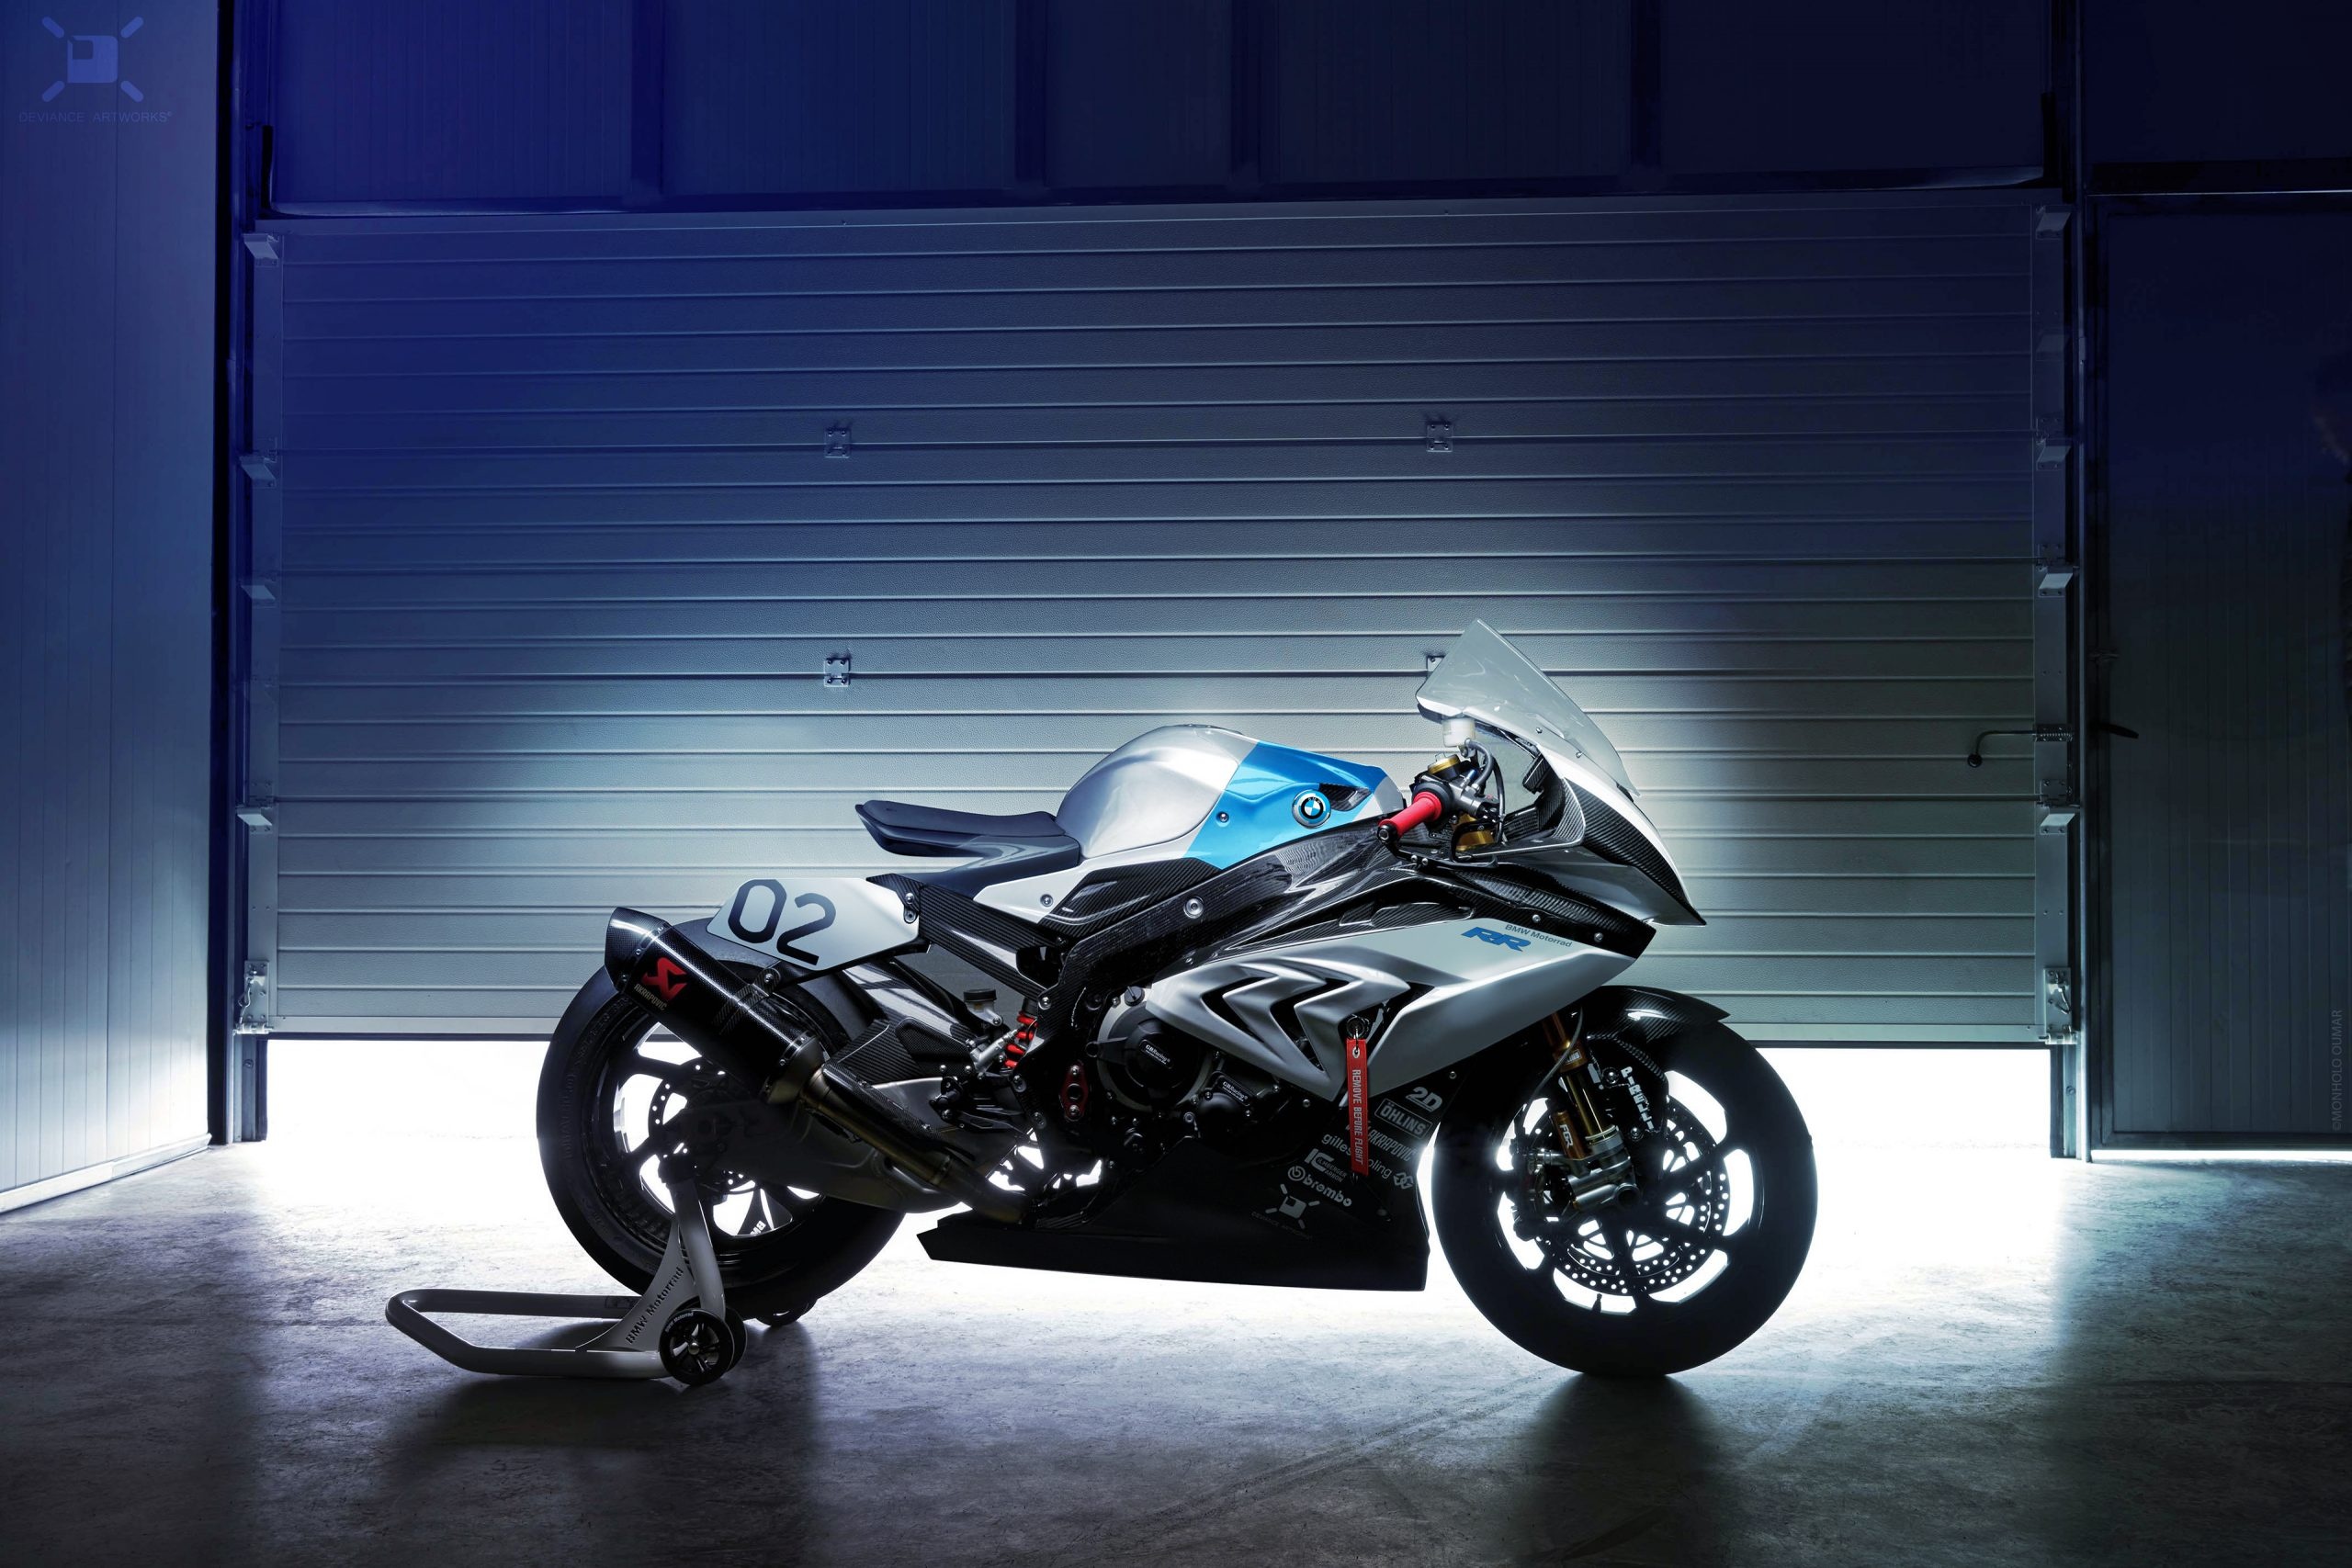 Superbike: The BMW HP4 Race modified, A non-street-legal, track-only version of the BMW S1000RR. 2560x1710 HD Wallpaper.